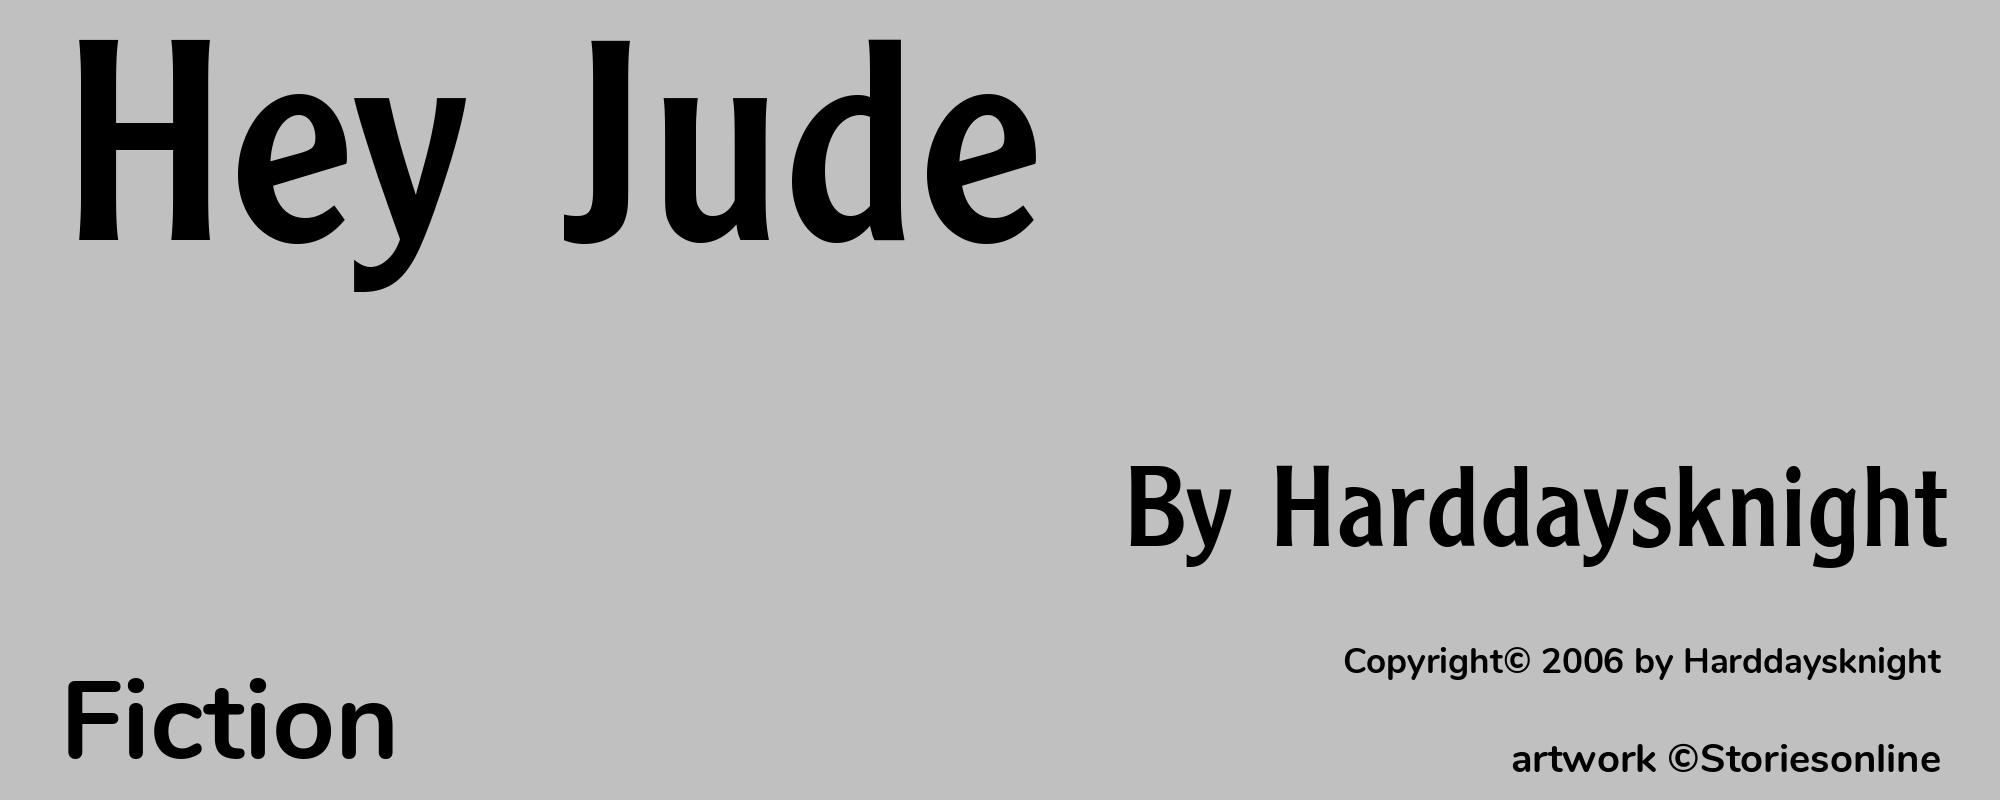 Hey Jude - Cover